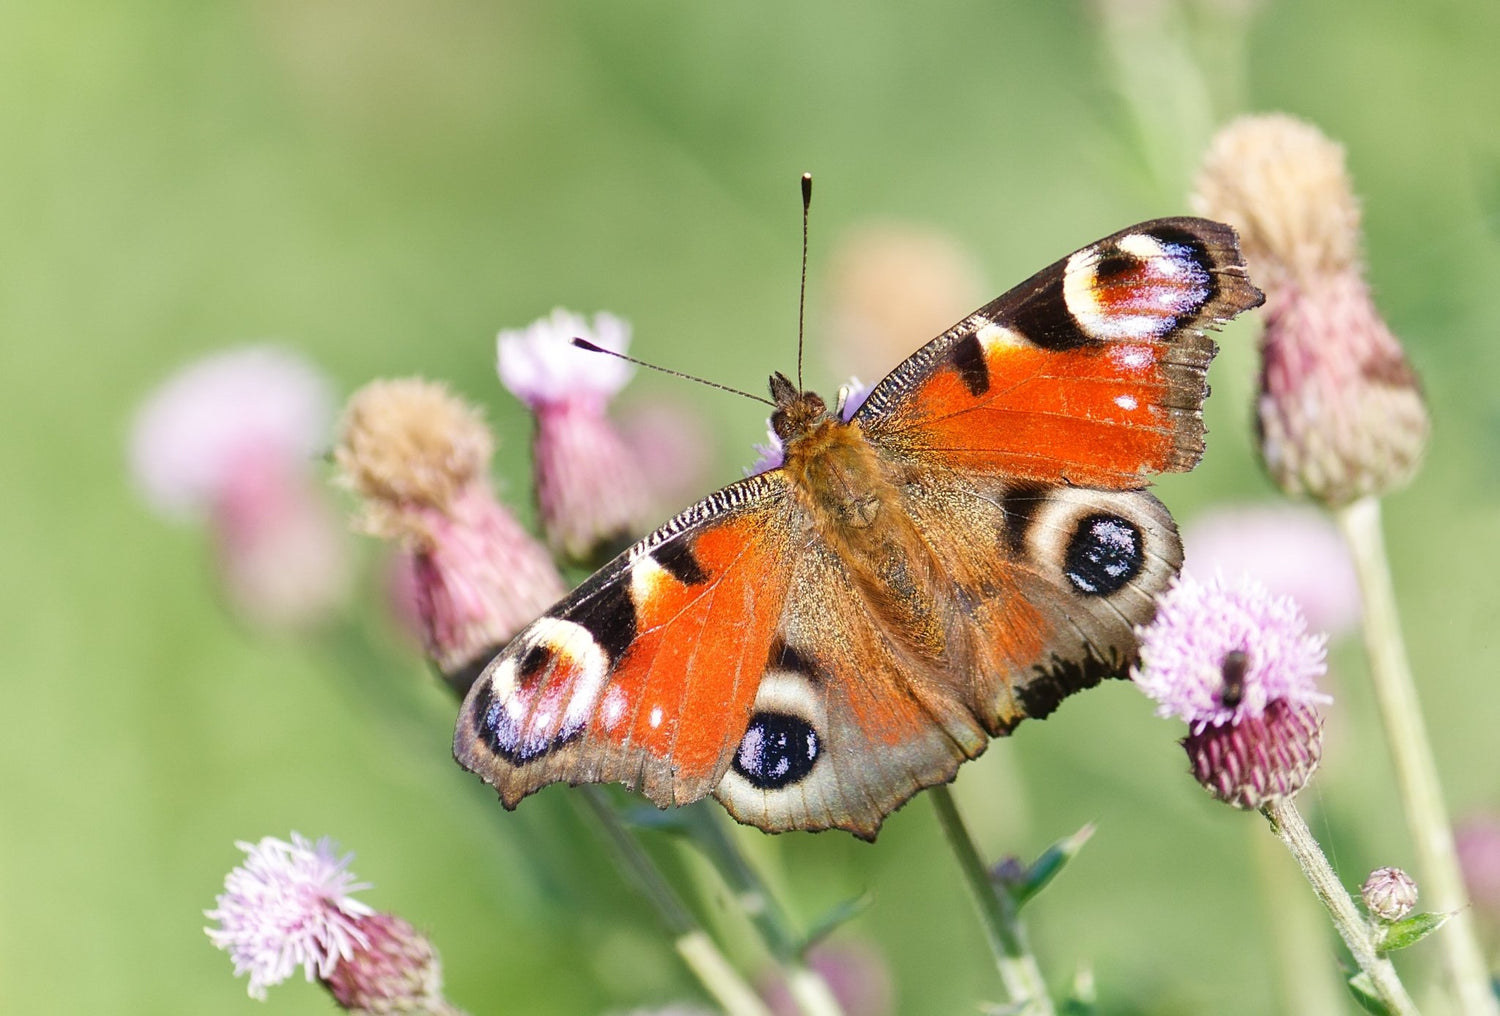 Wildflower Seed Mix for Butterflies and Bees - The Irish Gardener Store